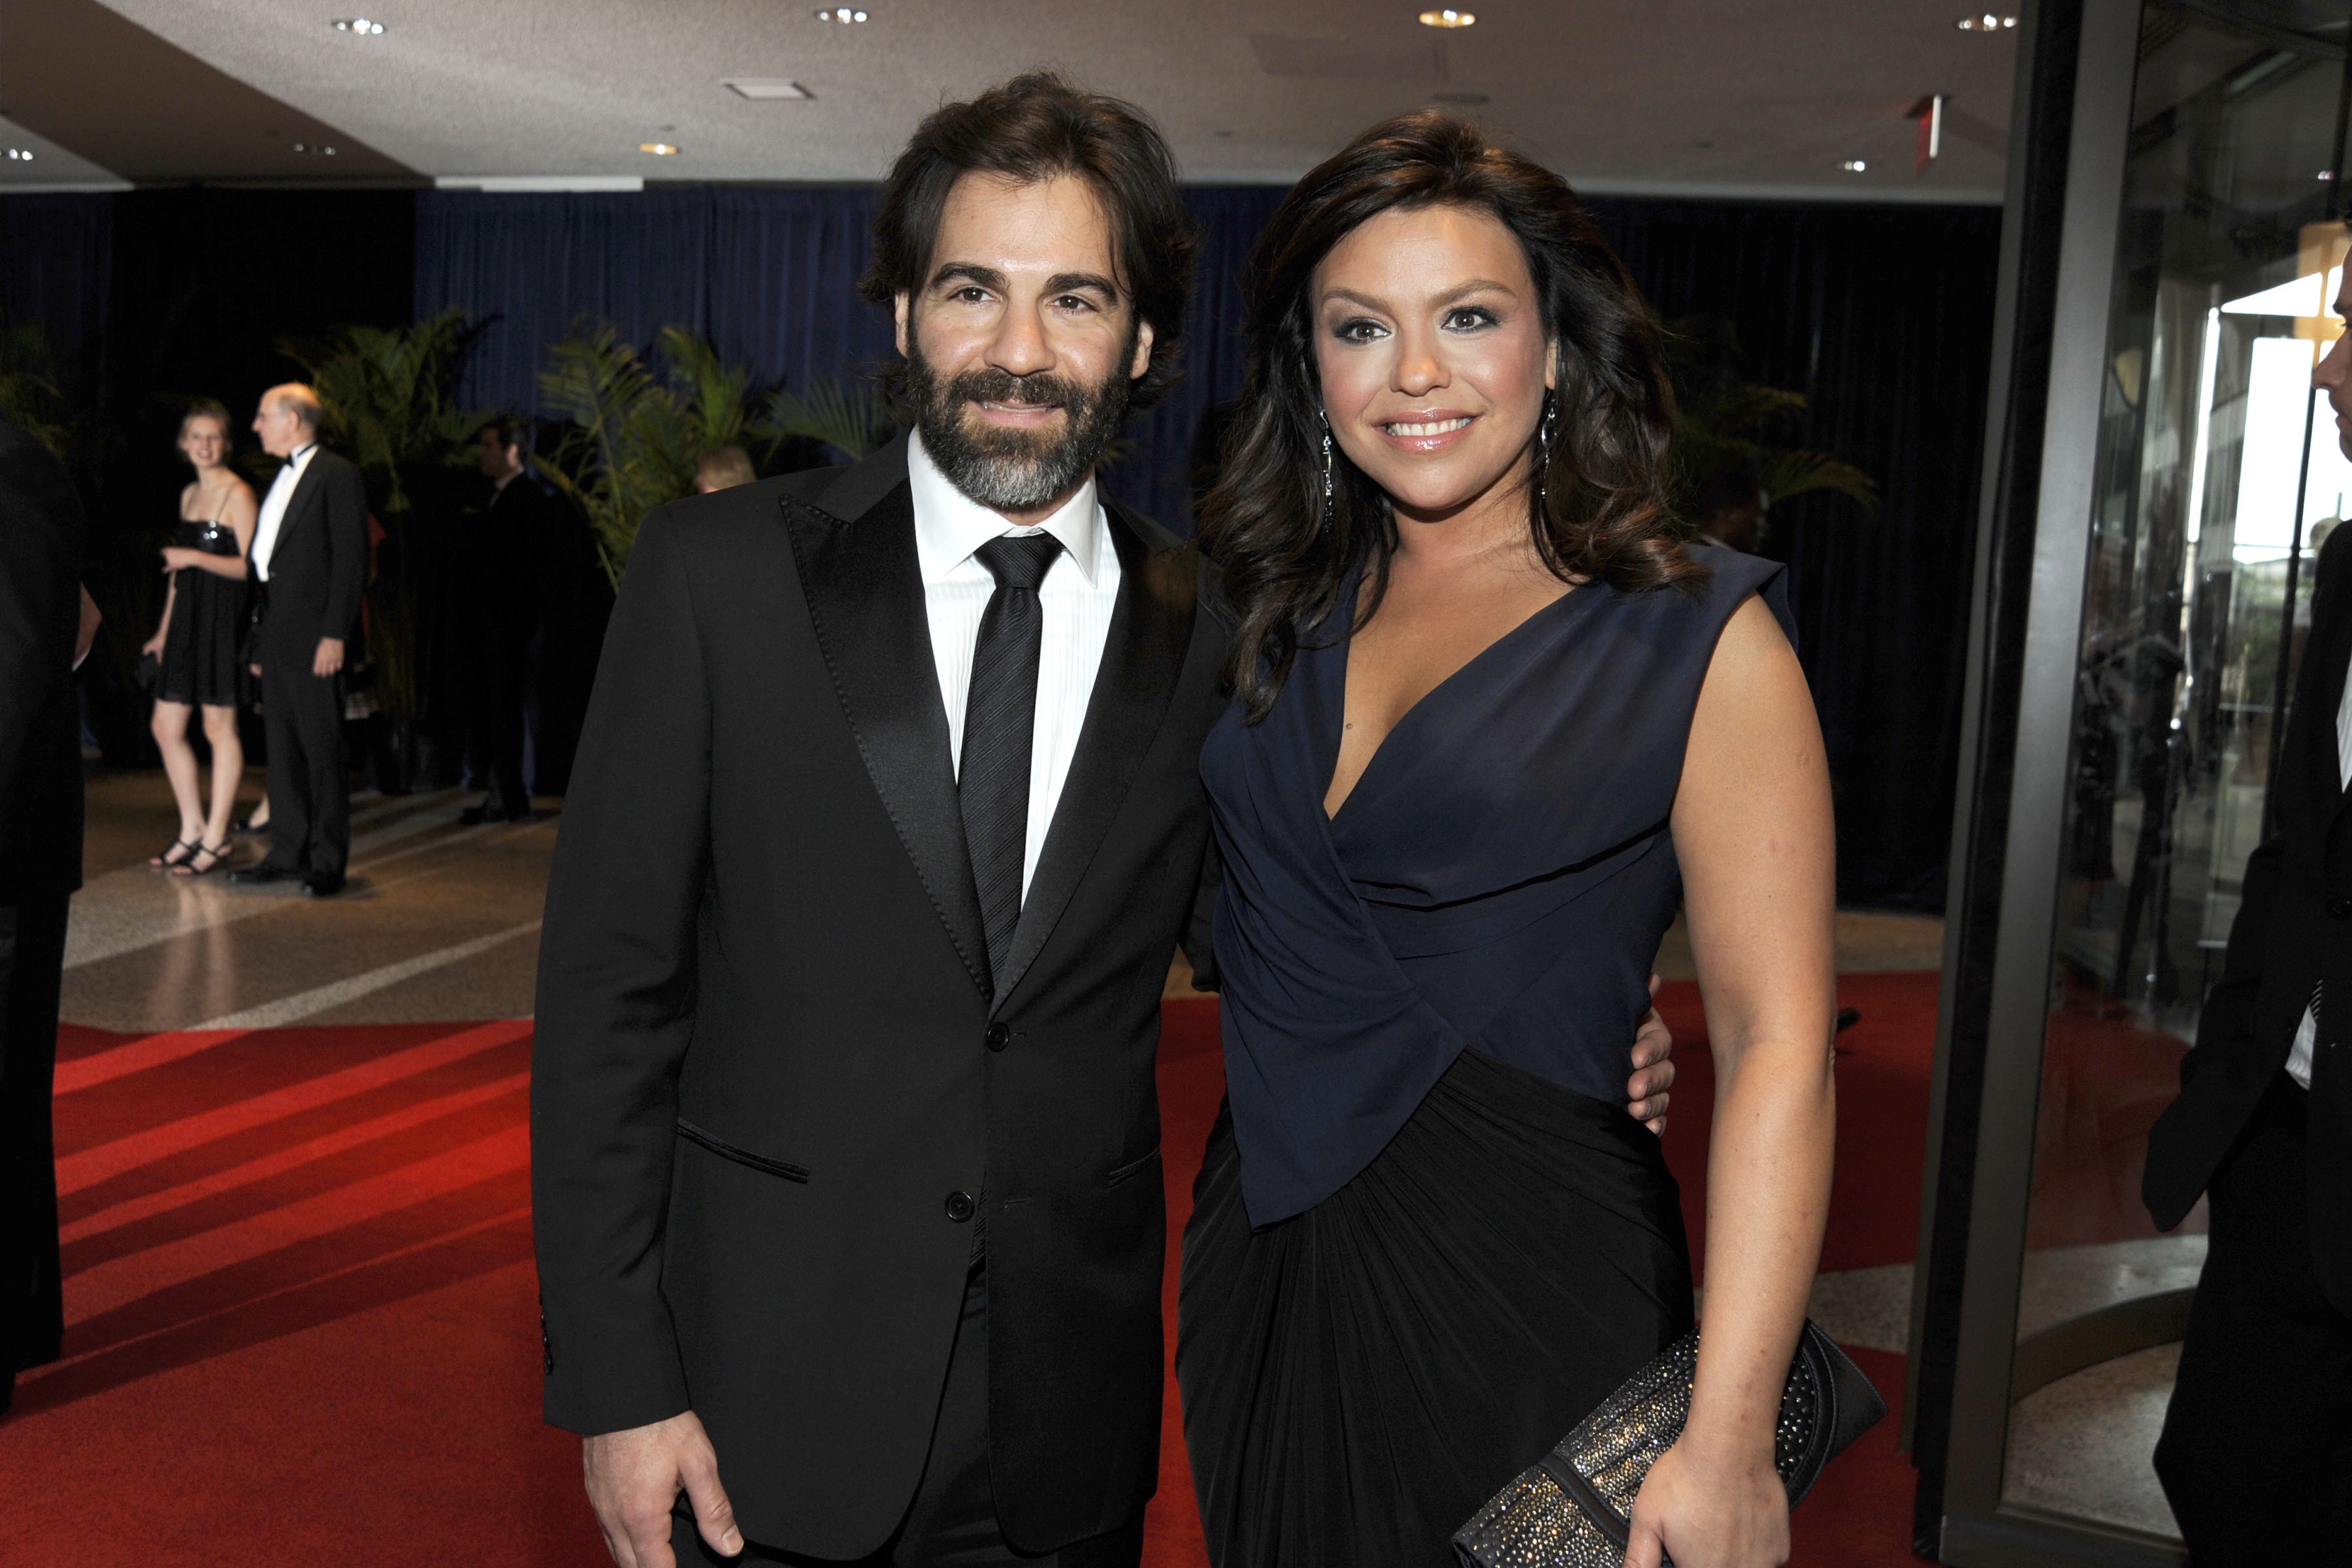 Rachael Ray and her husband John Cusimano at the 2010 White House Correspondents' Dinner on May 1, 2010. | Source: Patrick McMullan/Getty Images